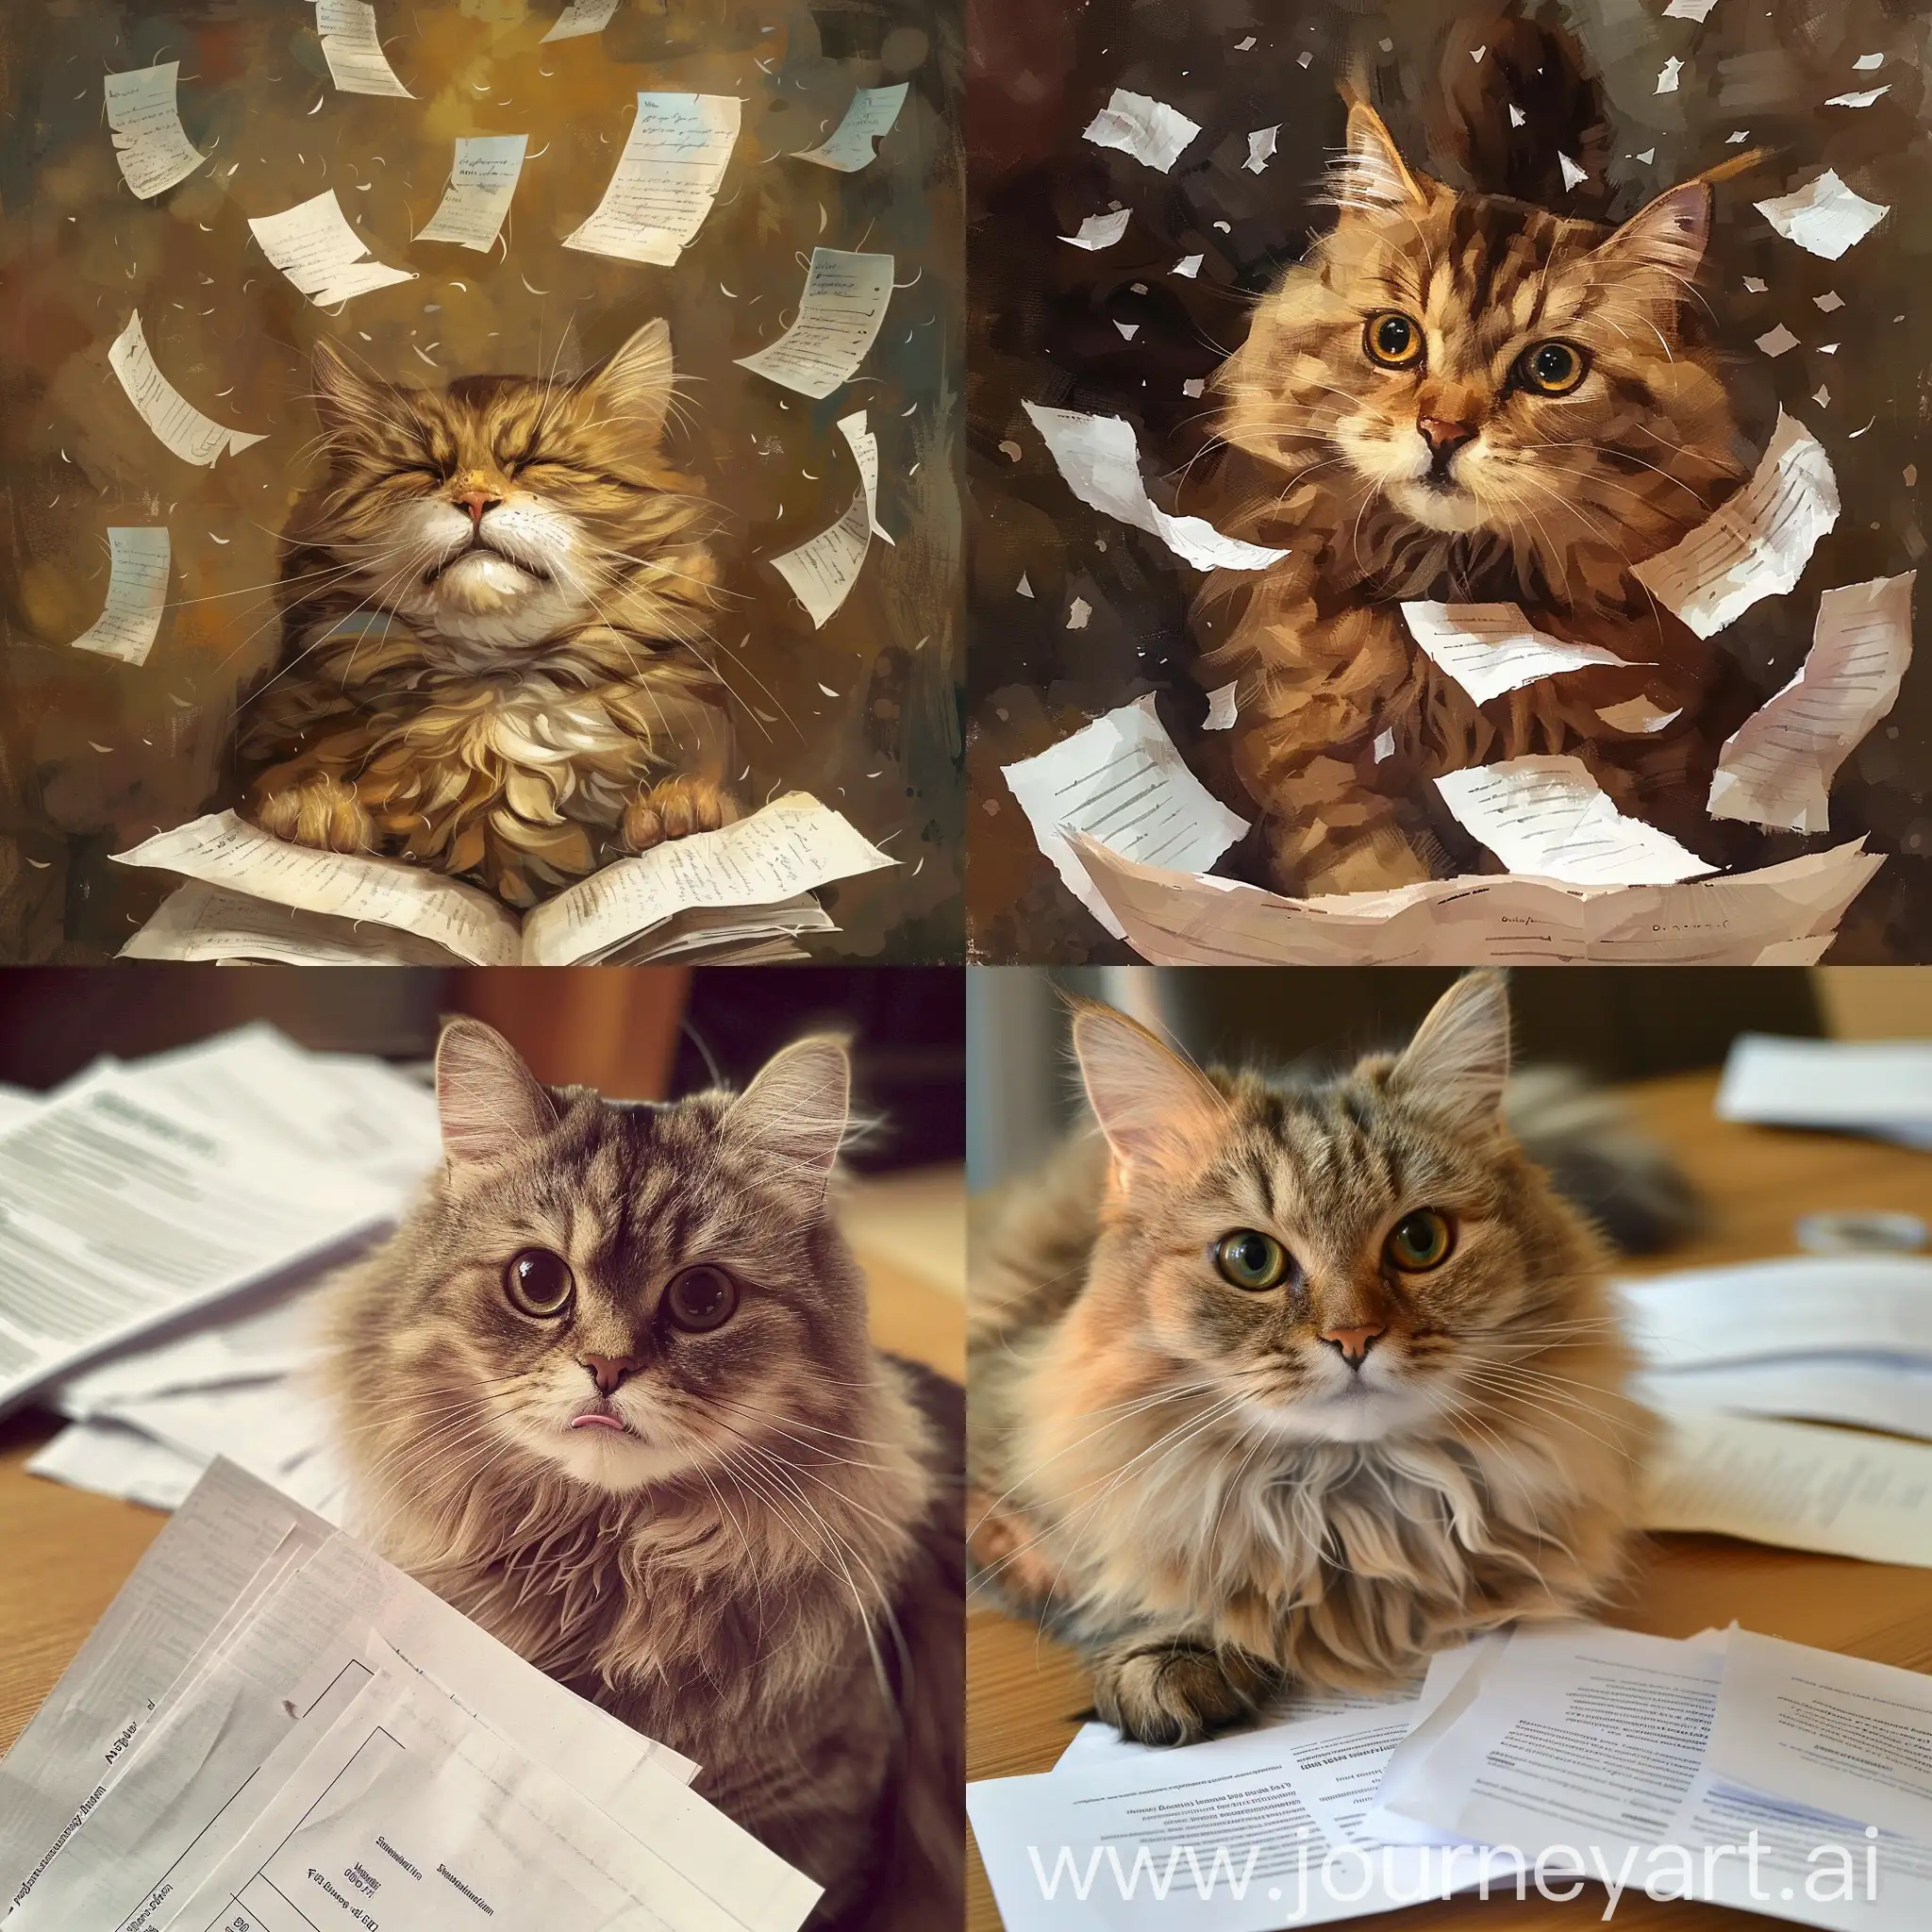 Give me a picky cat that is observing papers. The style is like alice in wonderland.